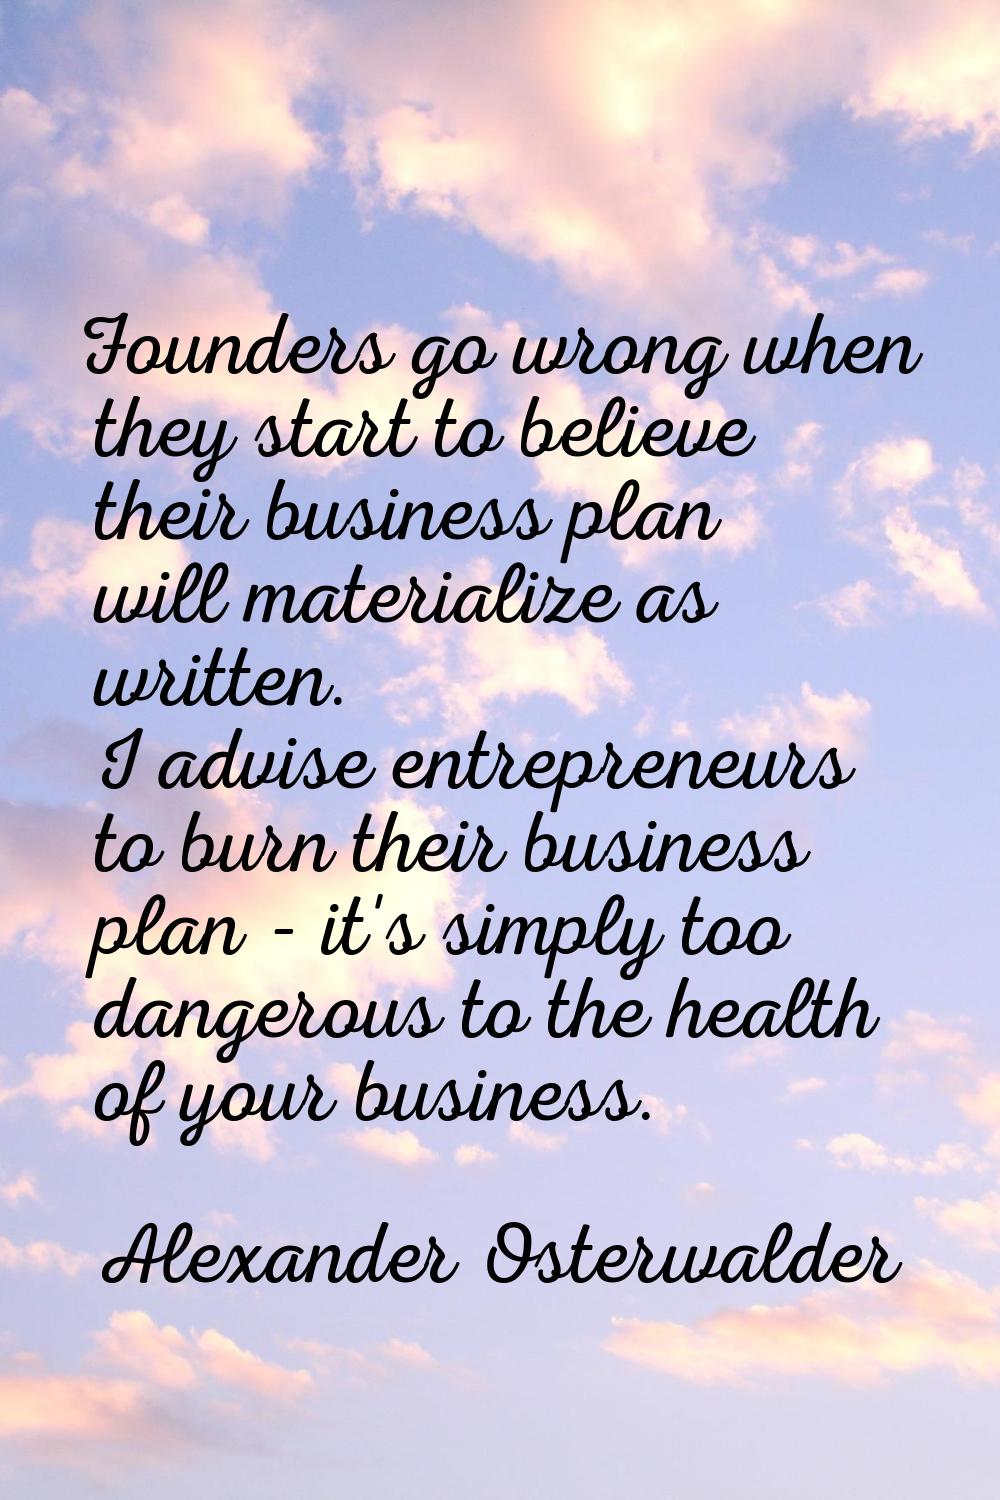 Founders go wrong when they start to believe their business plan will materialize as written. I adv